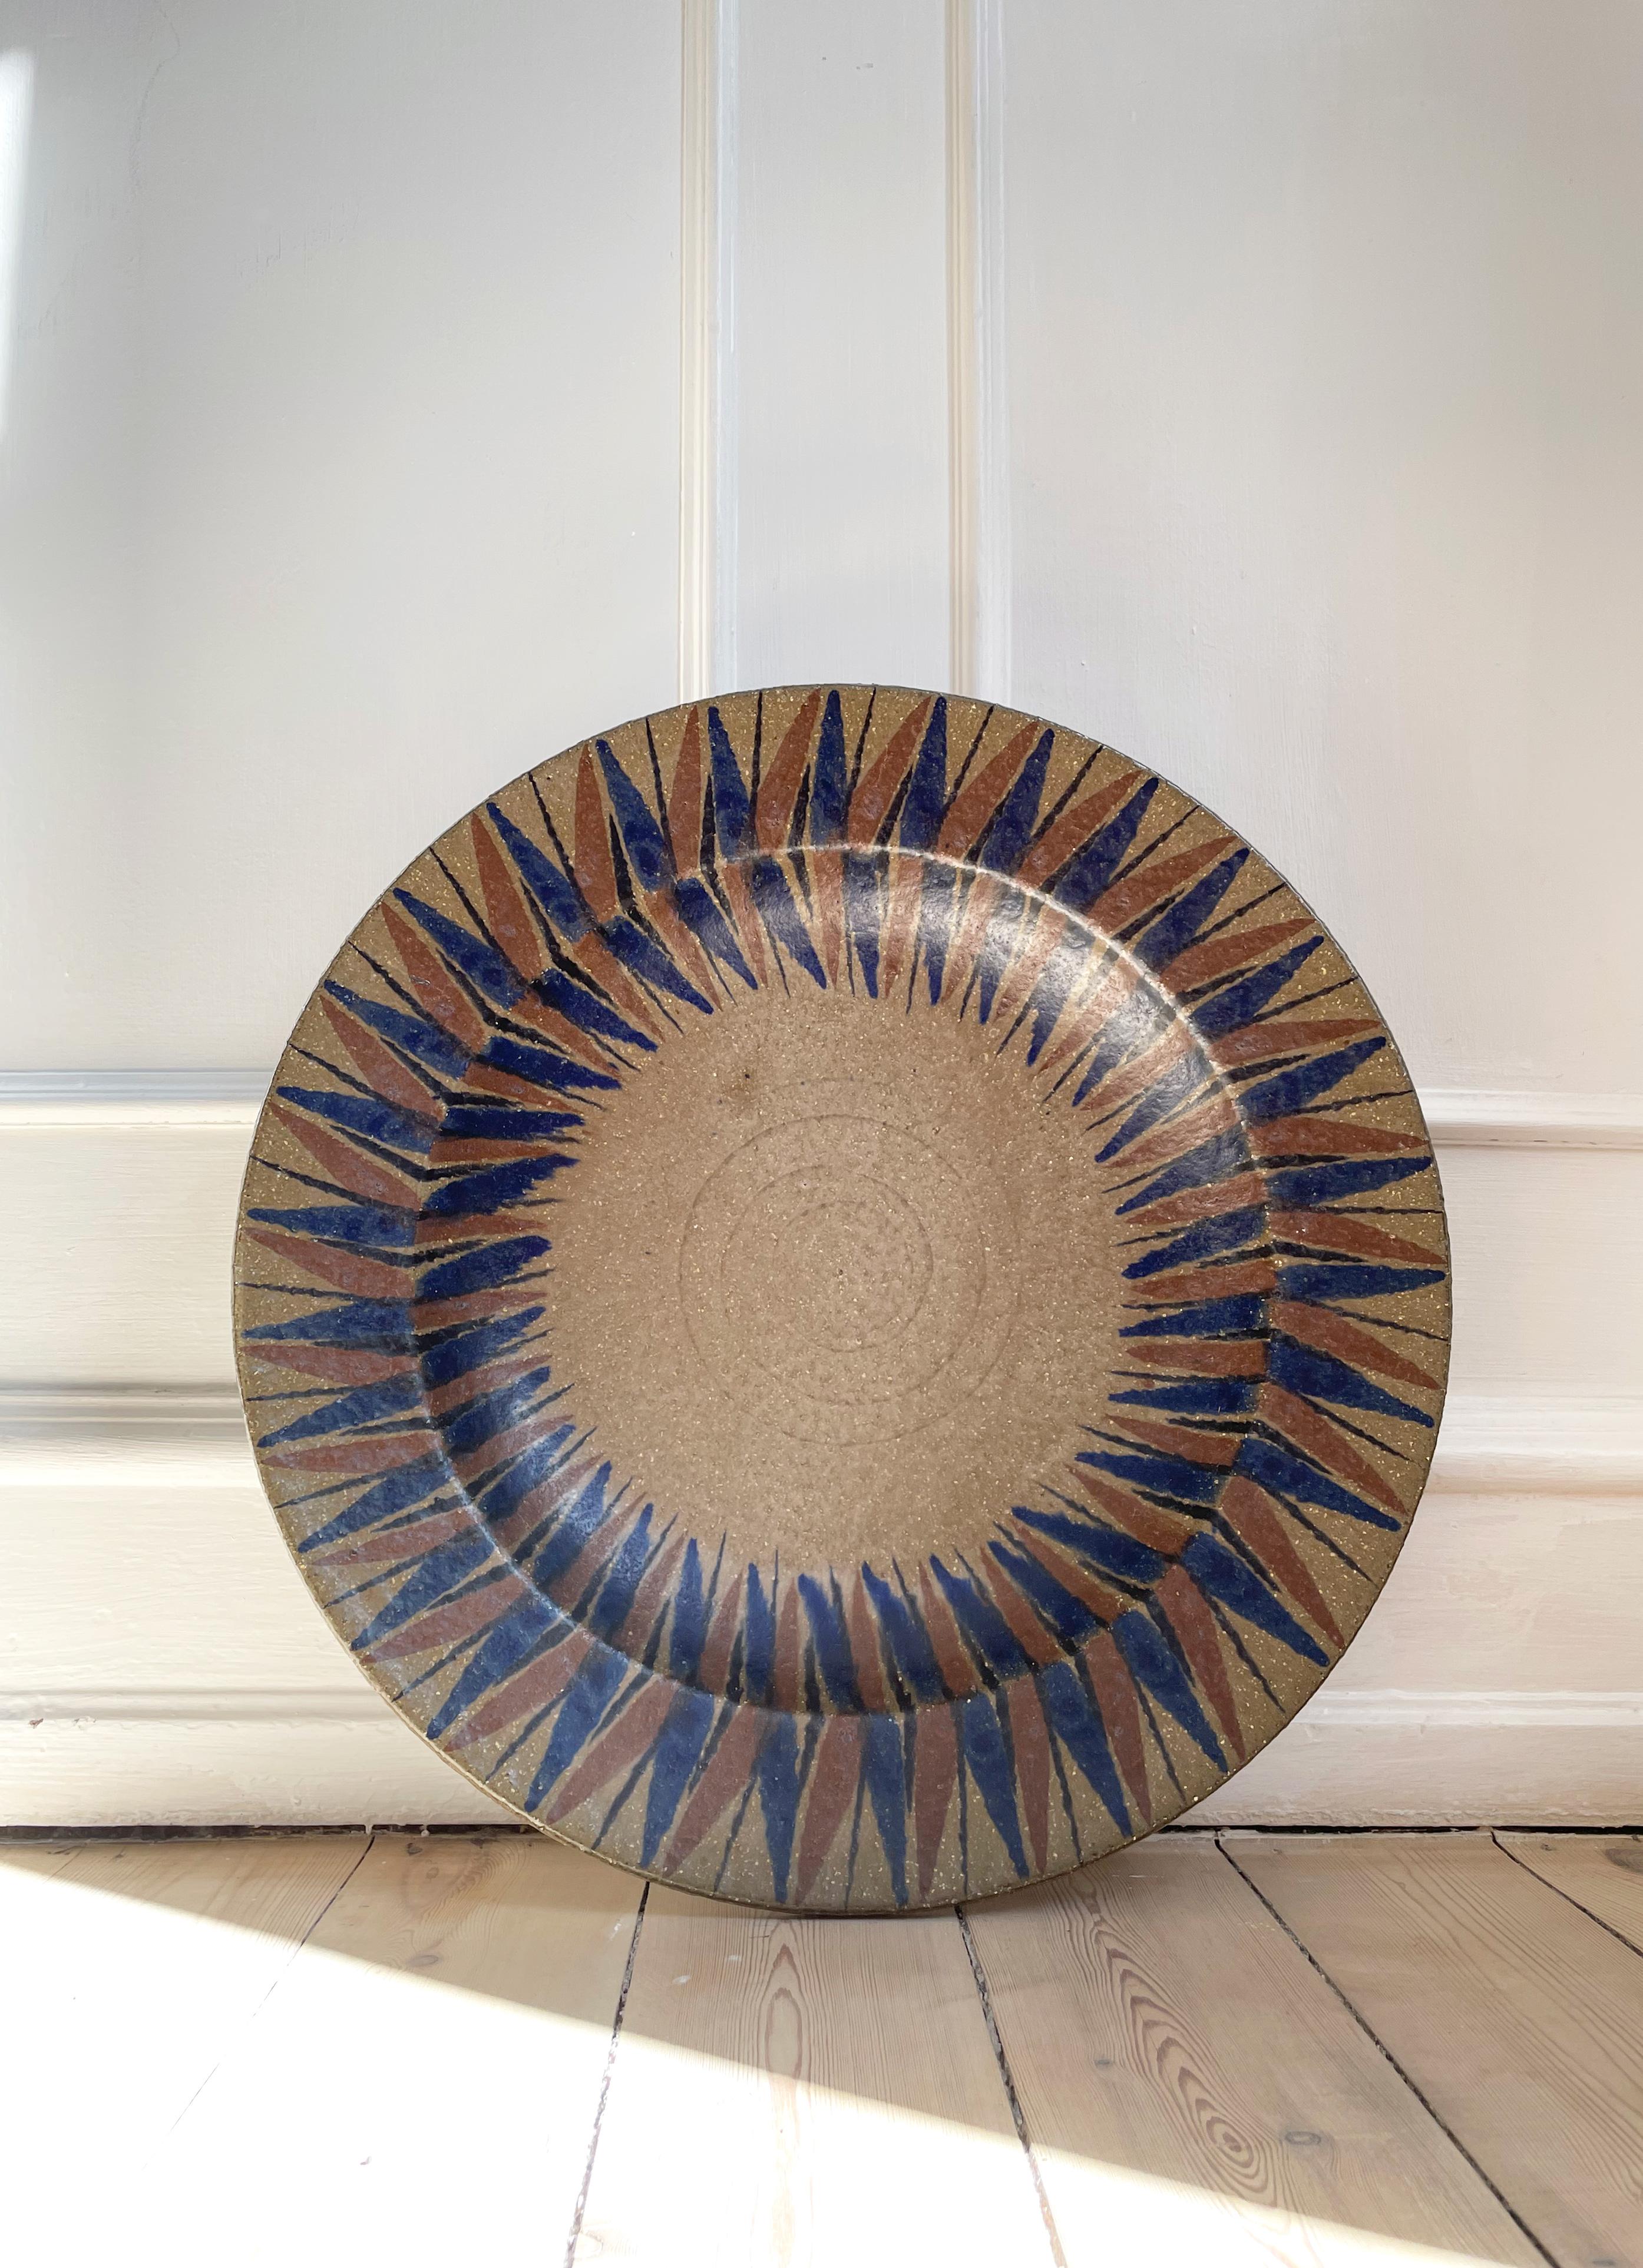 Glazed Very Large Ceramic Wall Bowl Platter, Graphic Decor, Organic Colors, 1960s For Sale